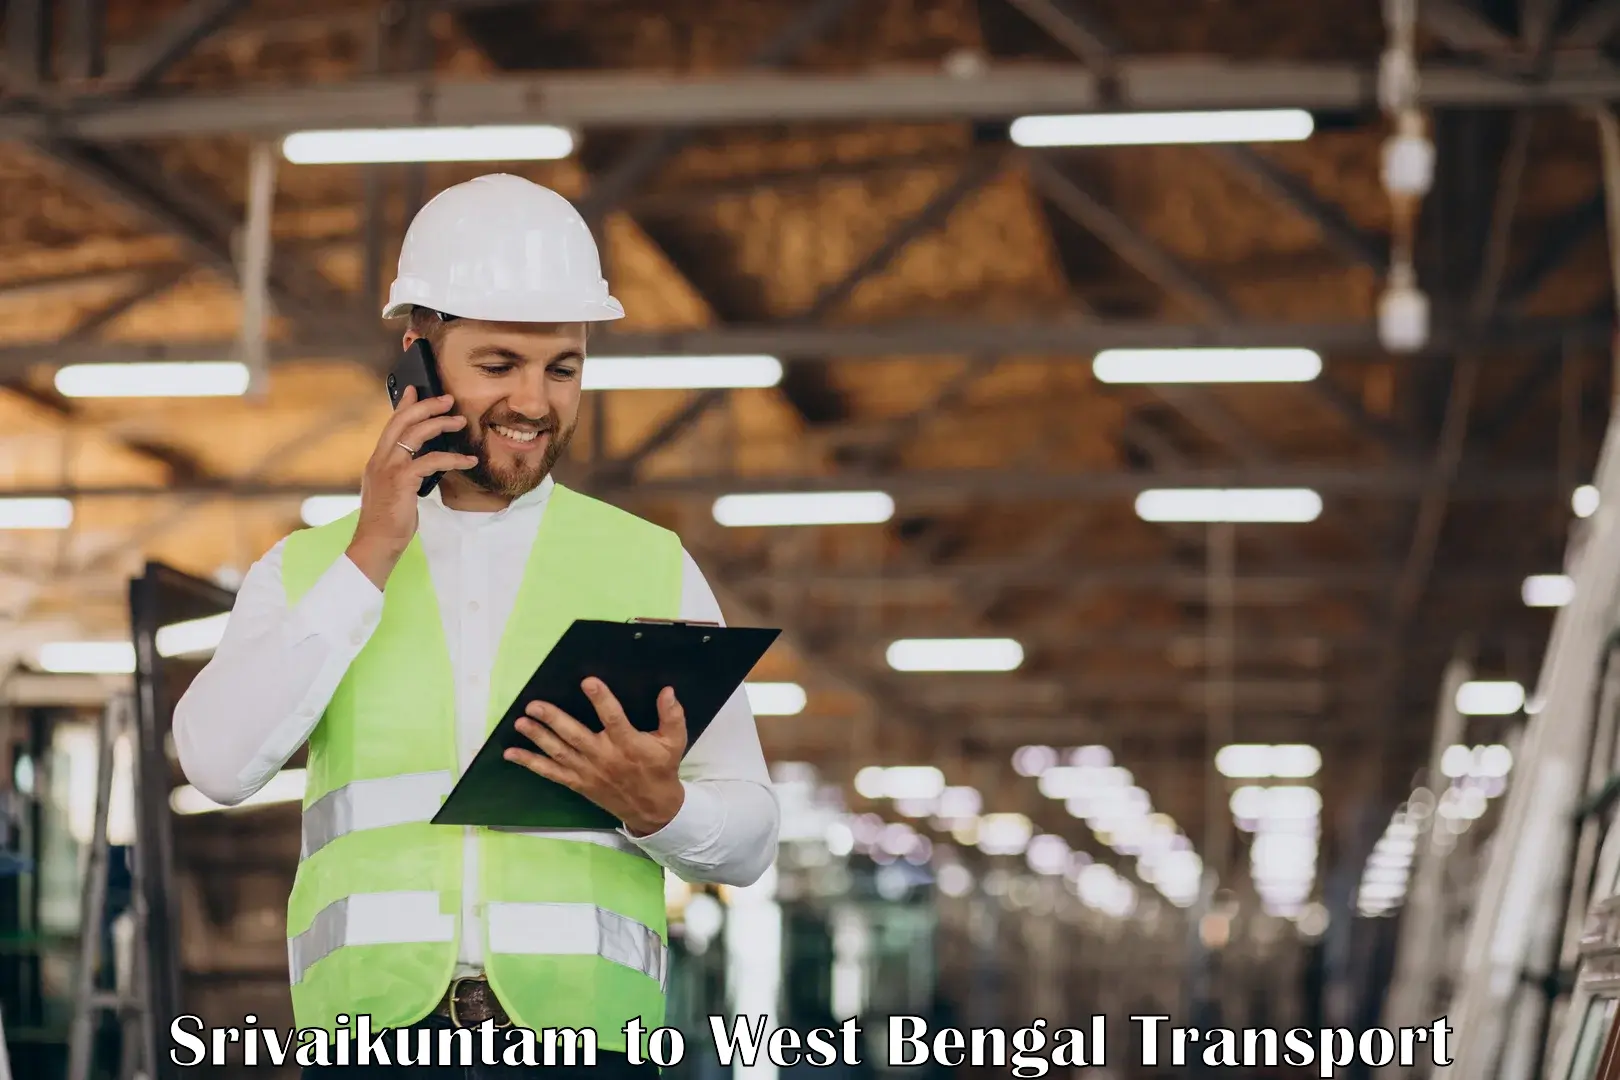 Delivery service Srivaikuntam to West Bengal